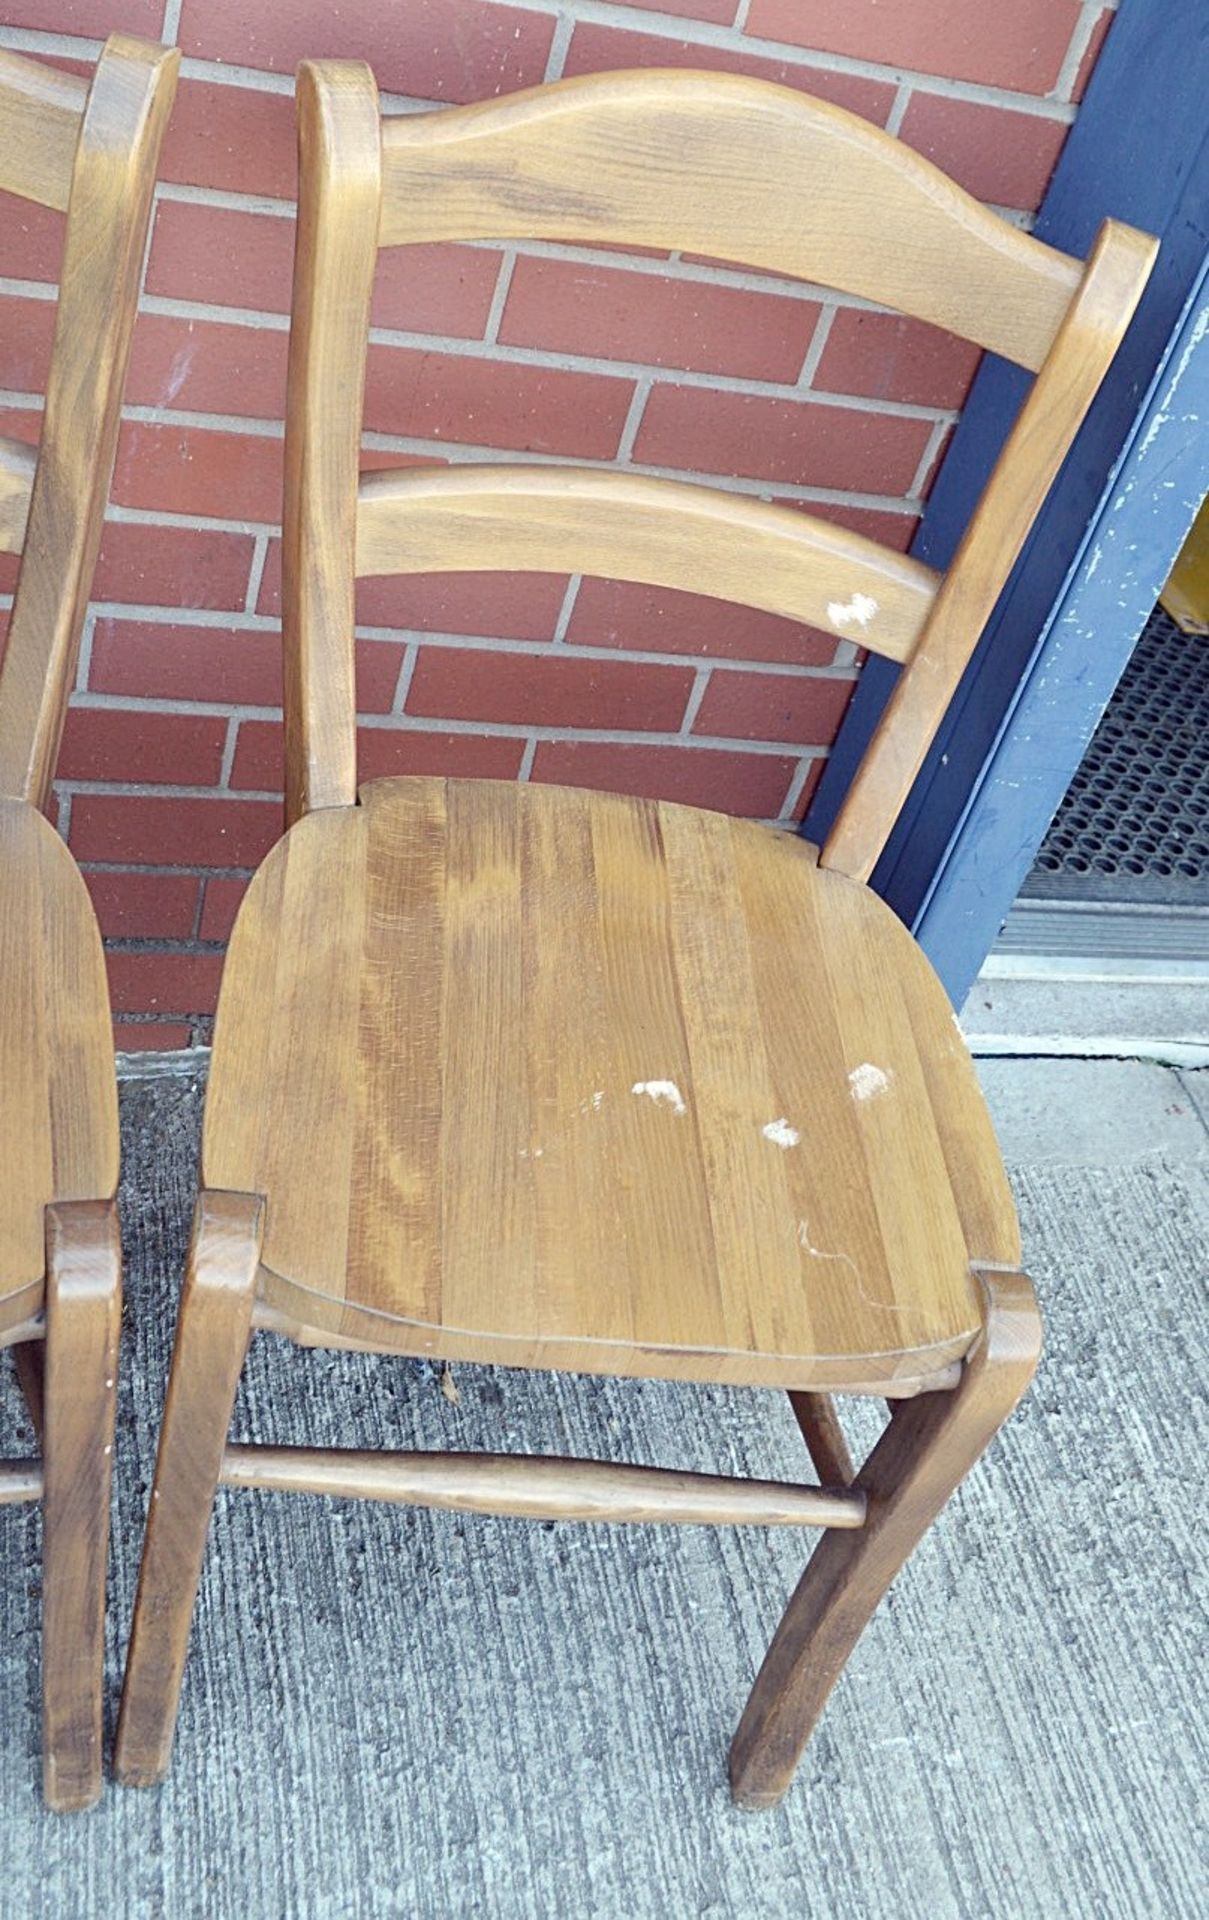 3 x Matching Sturdy Solid Wood Chairs With An Attractive Varnished Finish - Dimensions: H90 x W47 - Image 7 of 7